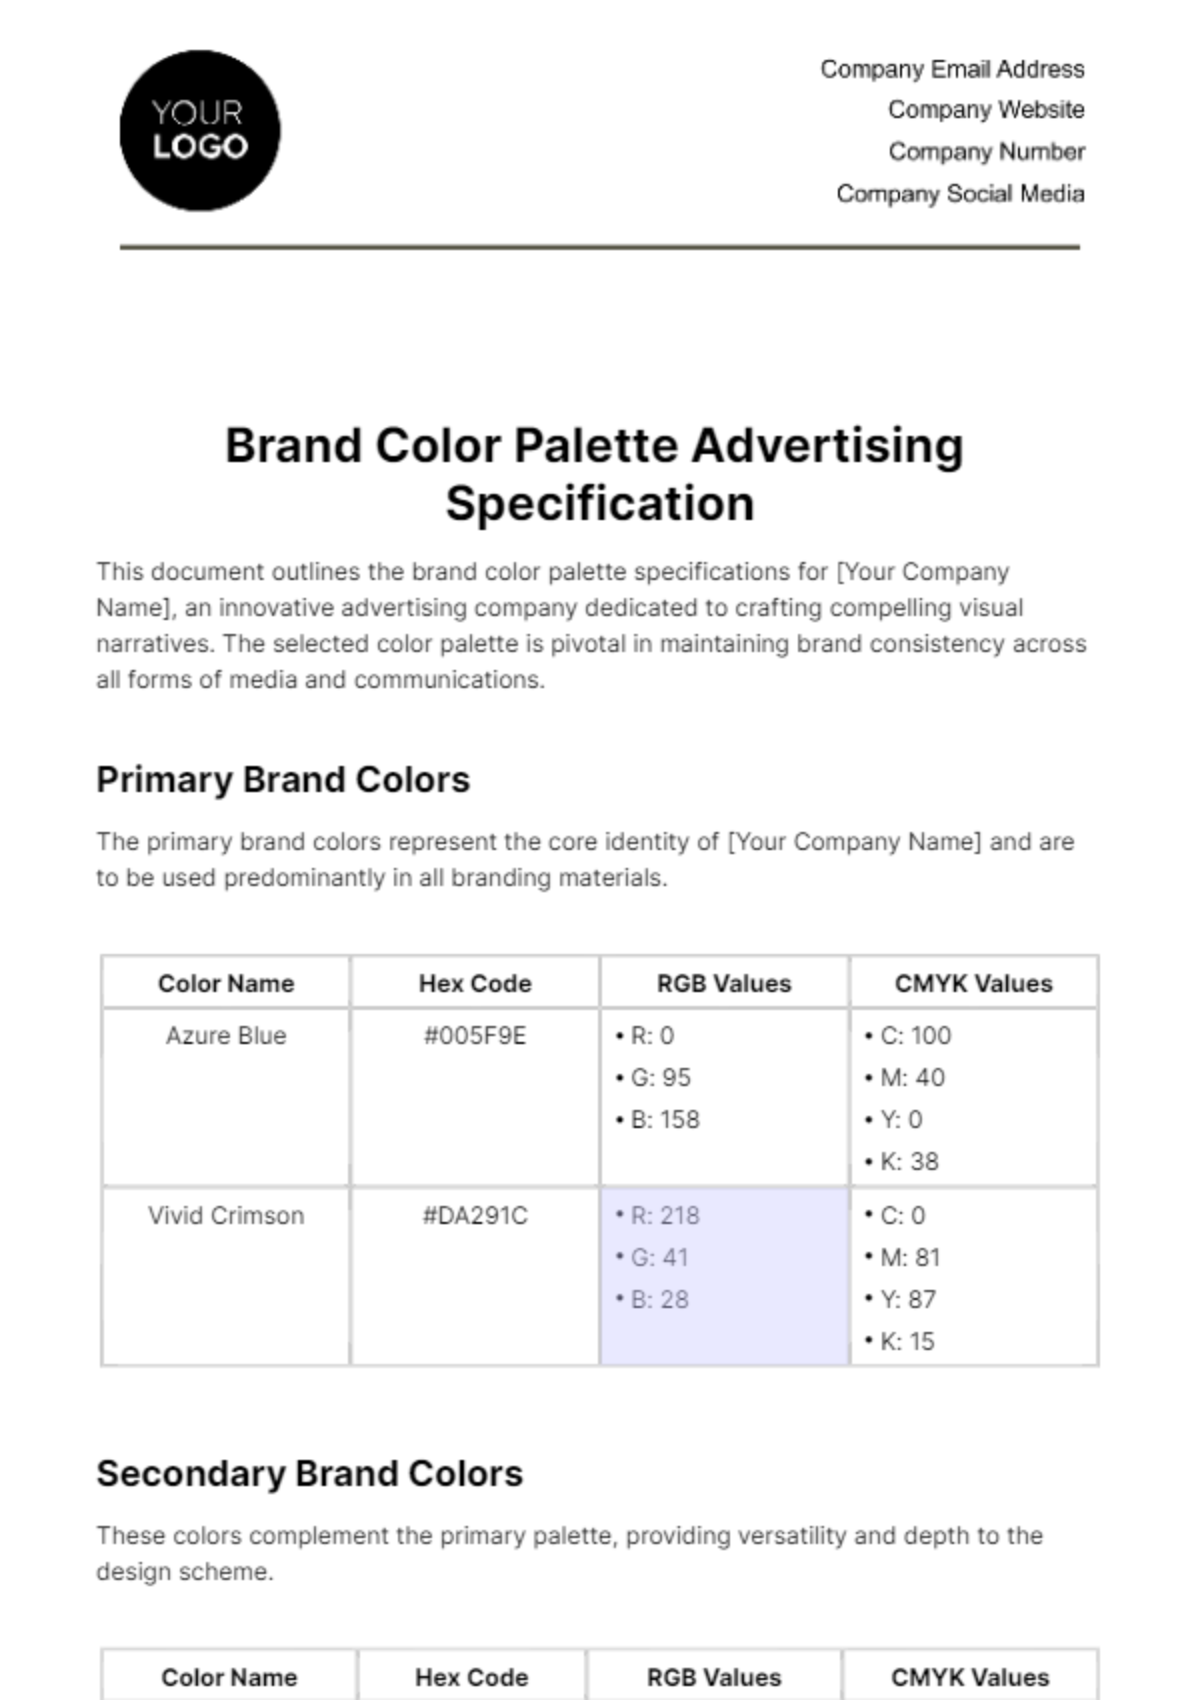 Brand Color Palette Advertising Specification Template